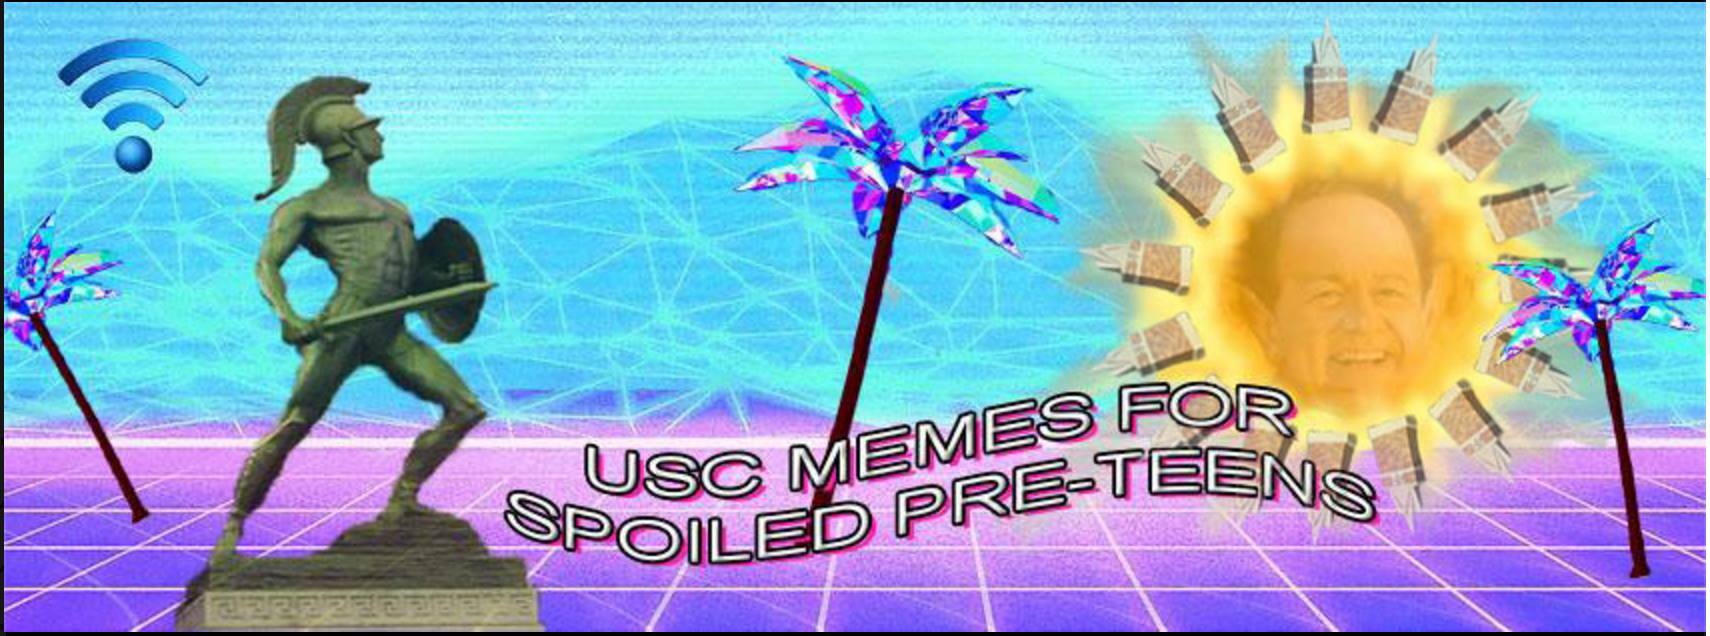 A USC meme group, obtained from Facebook.